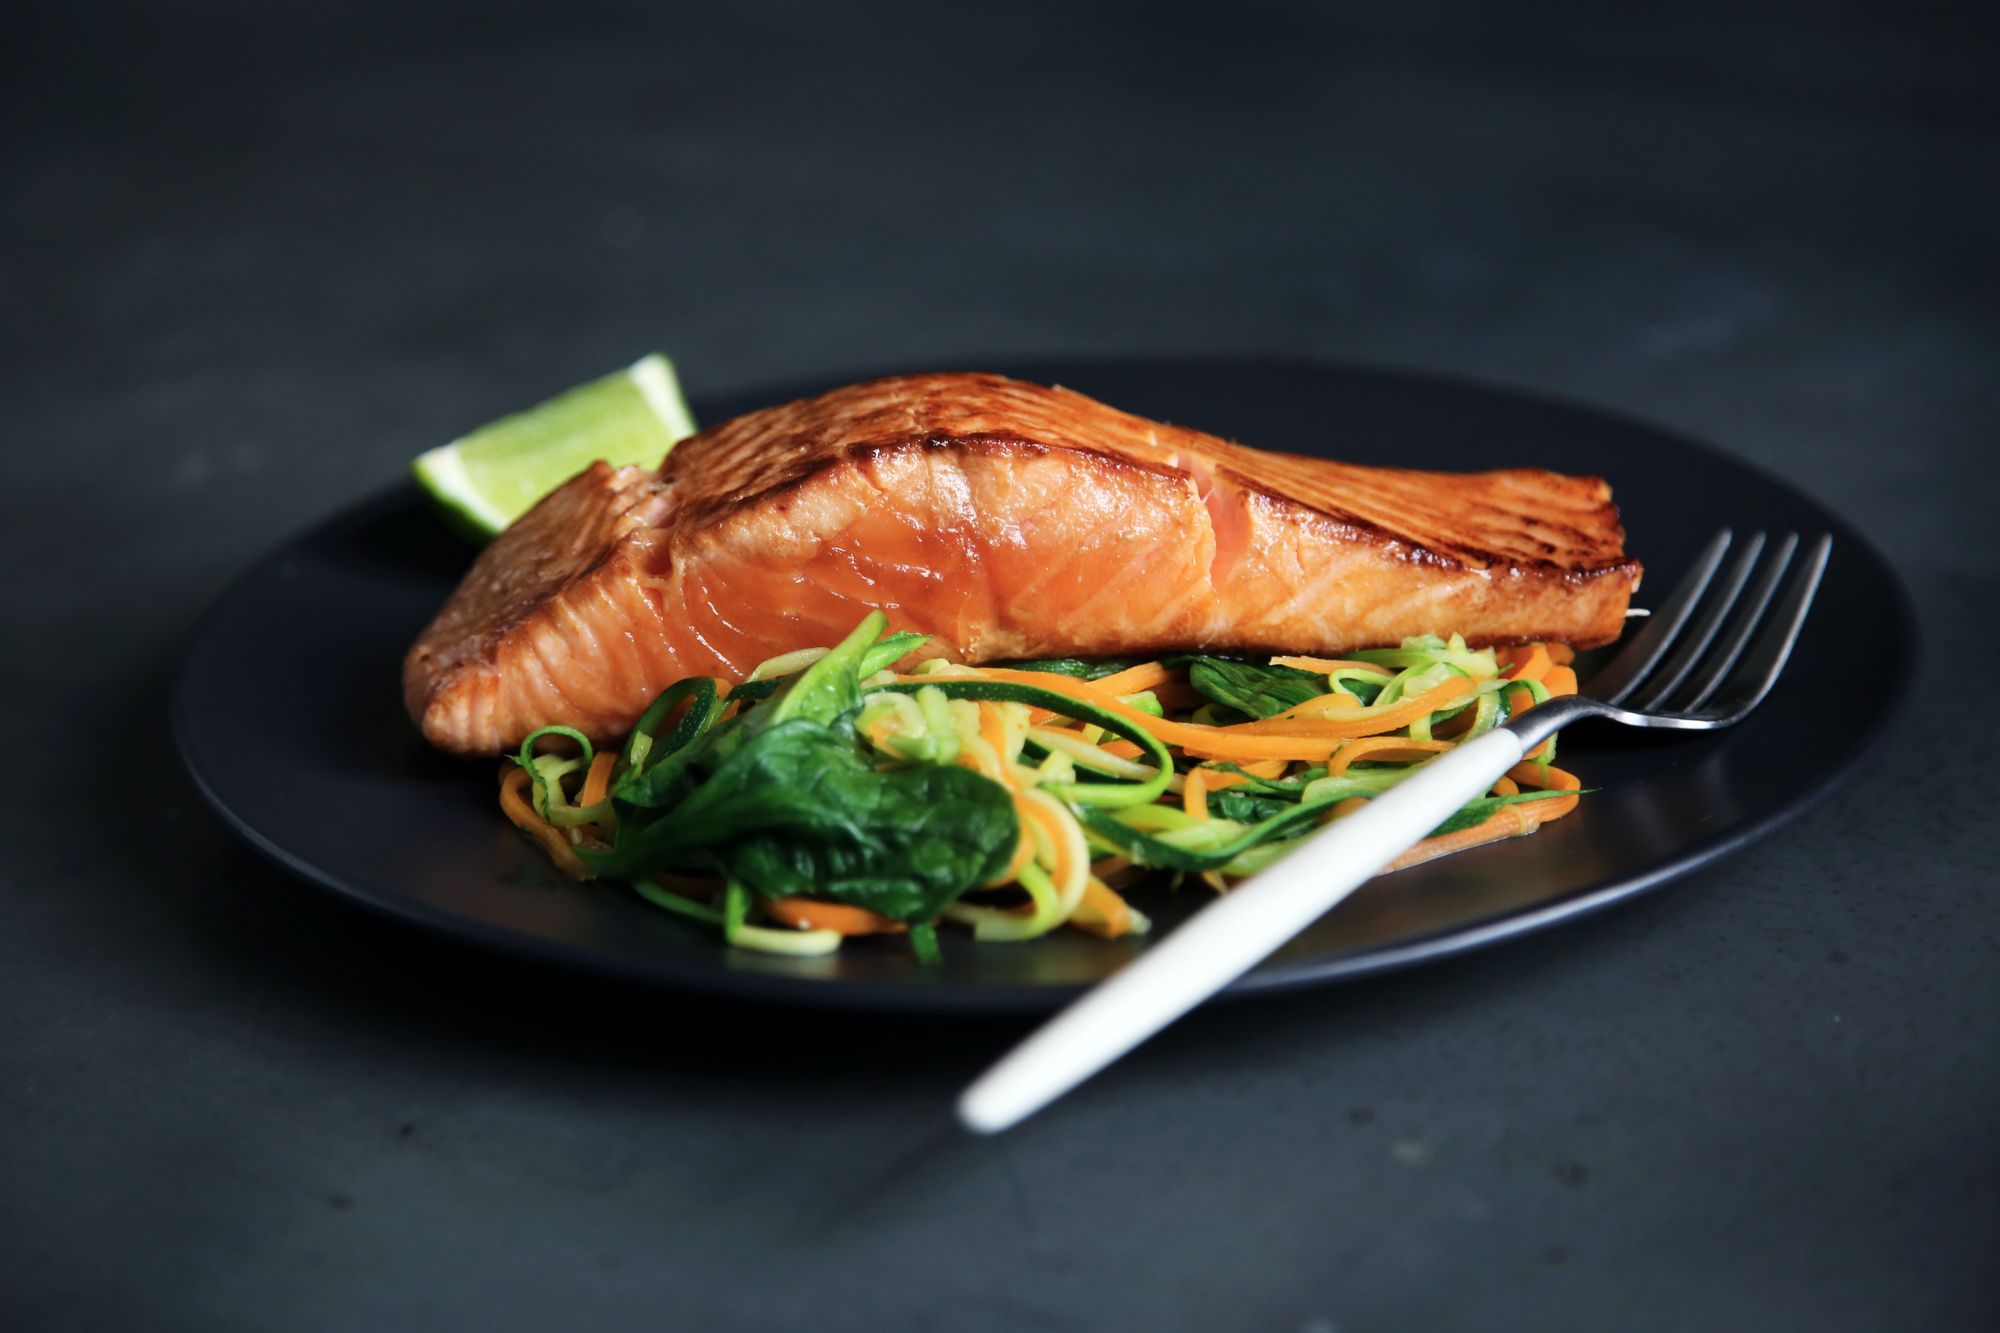 Salmon and vegetable meal for diabetes-friendly diet, Overflow Health's guide to managing blood sugar.